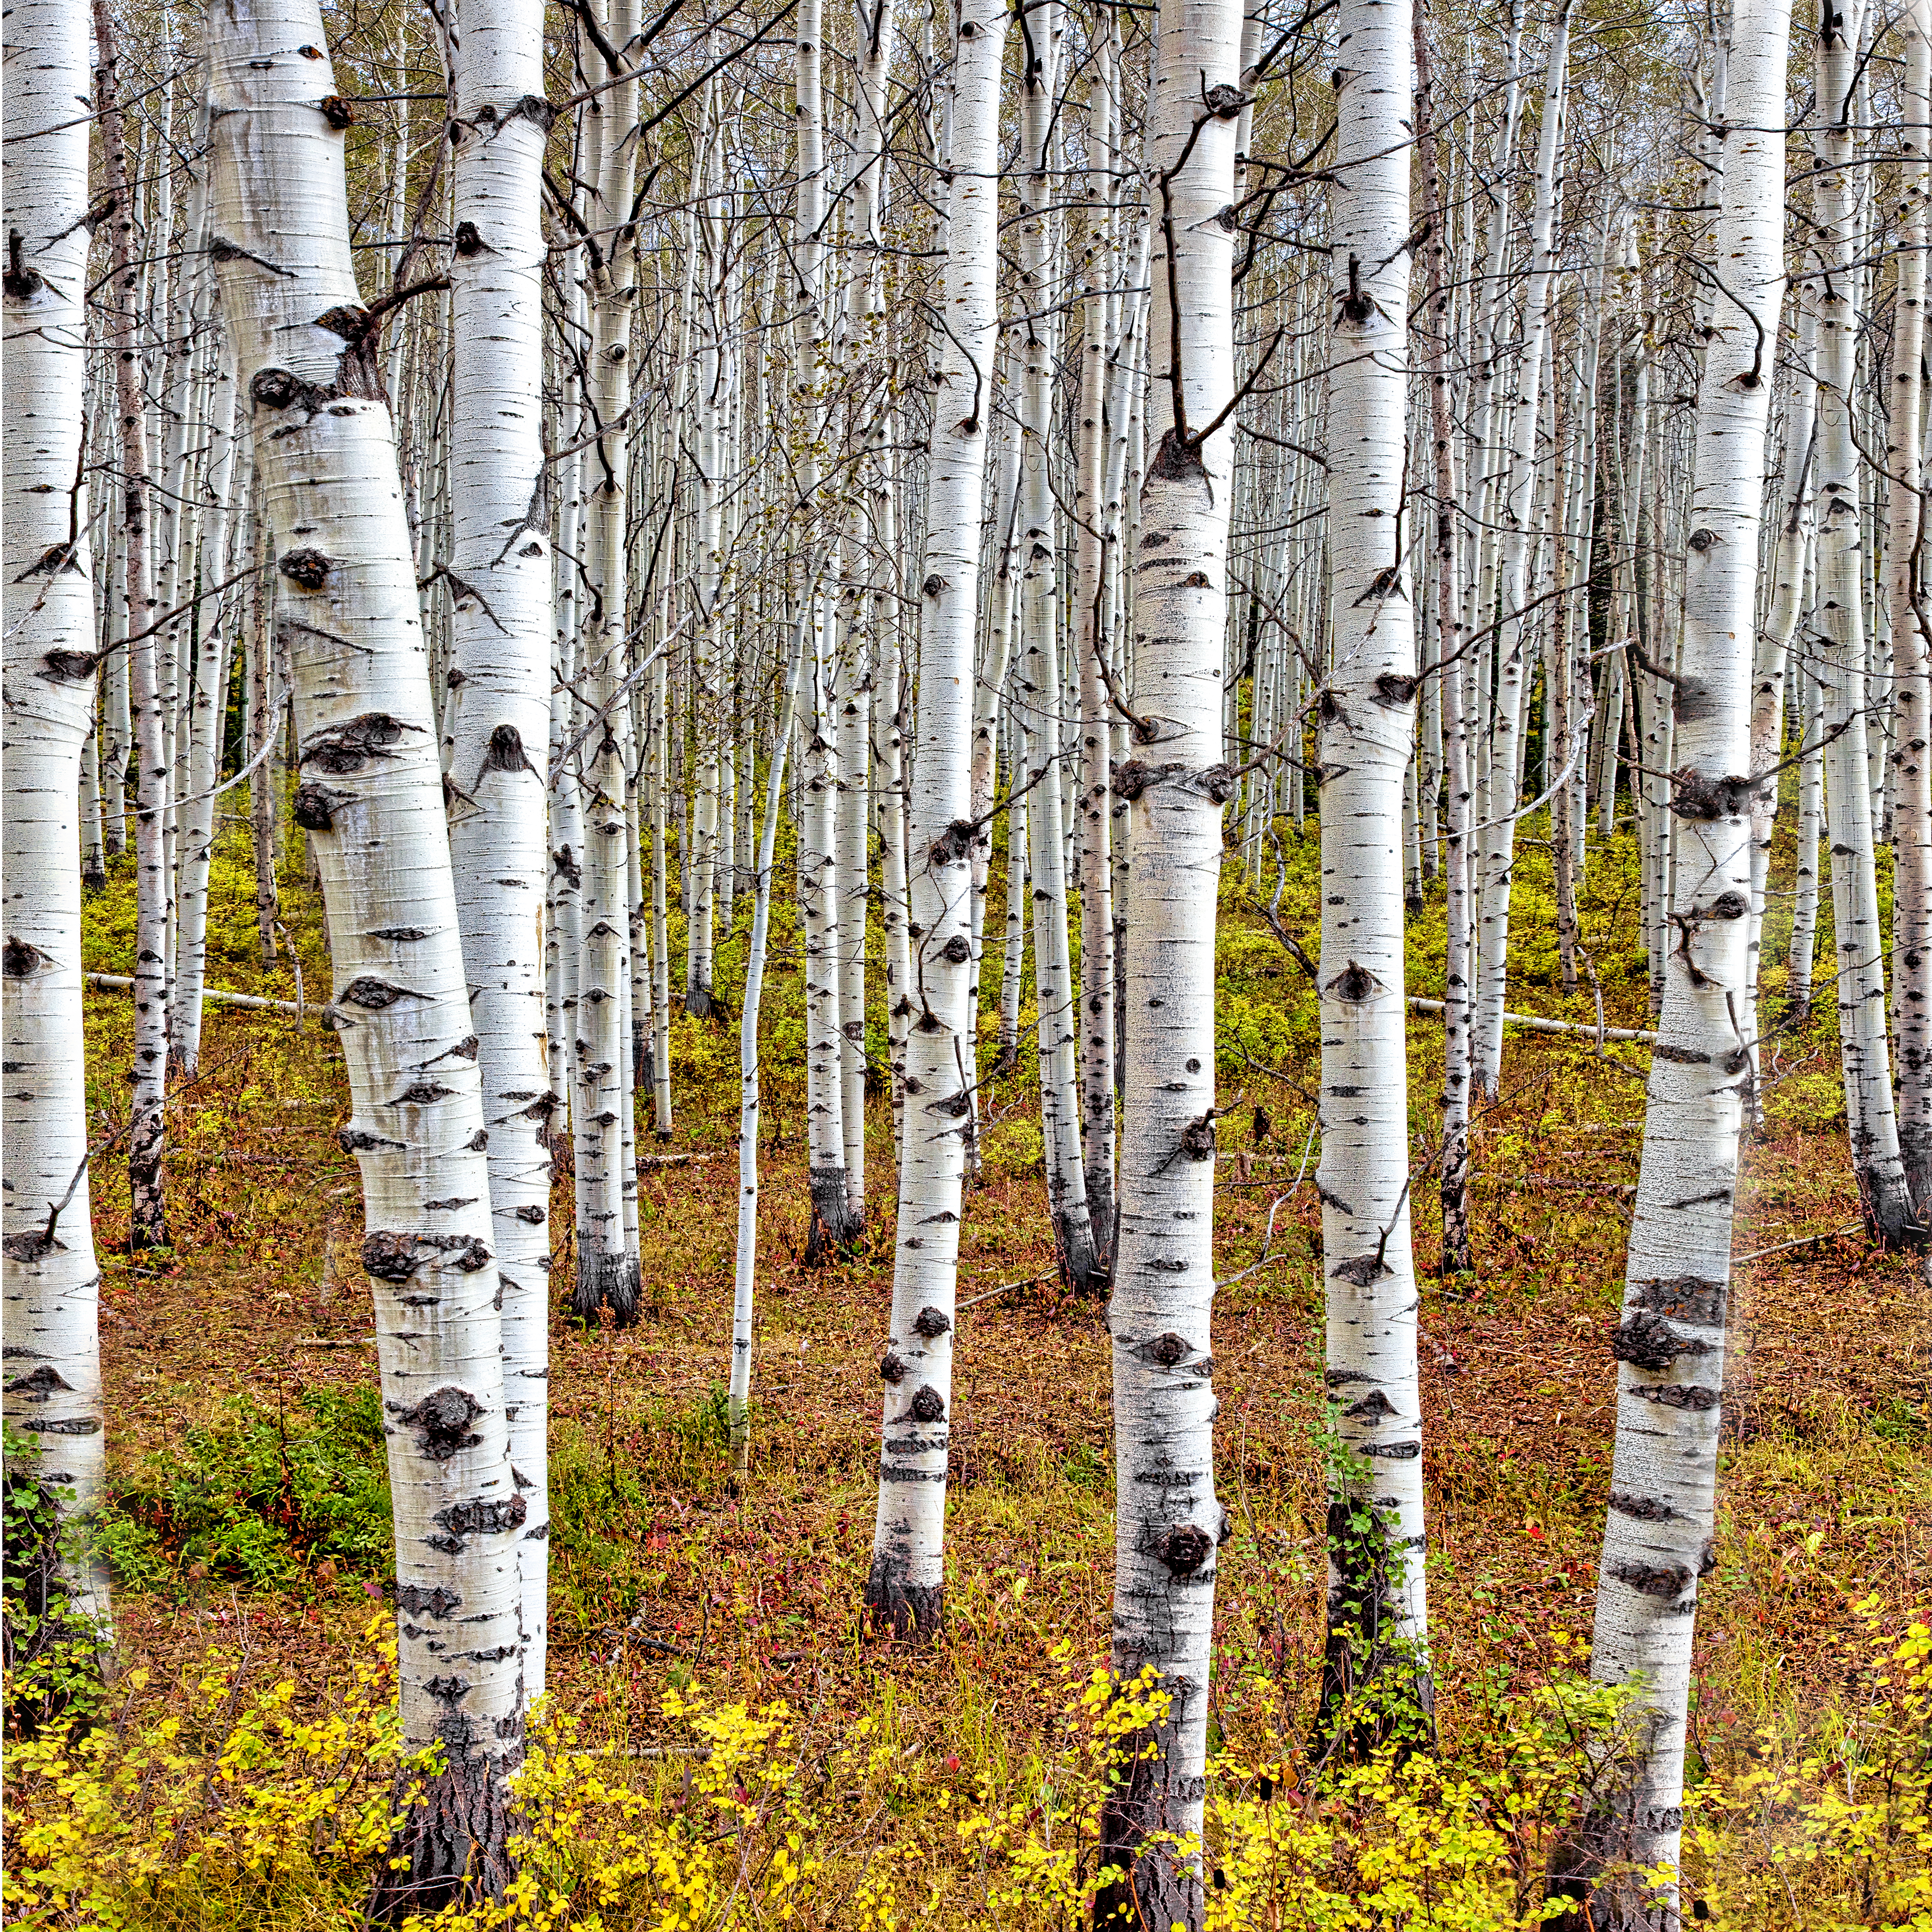 ASPEN TRUNKS - A favorit shot of many landscape photographers. I have tried several myself. I like this one,. but I am still looking.